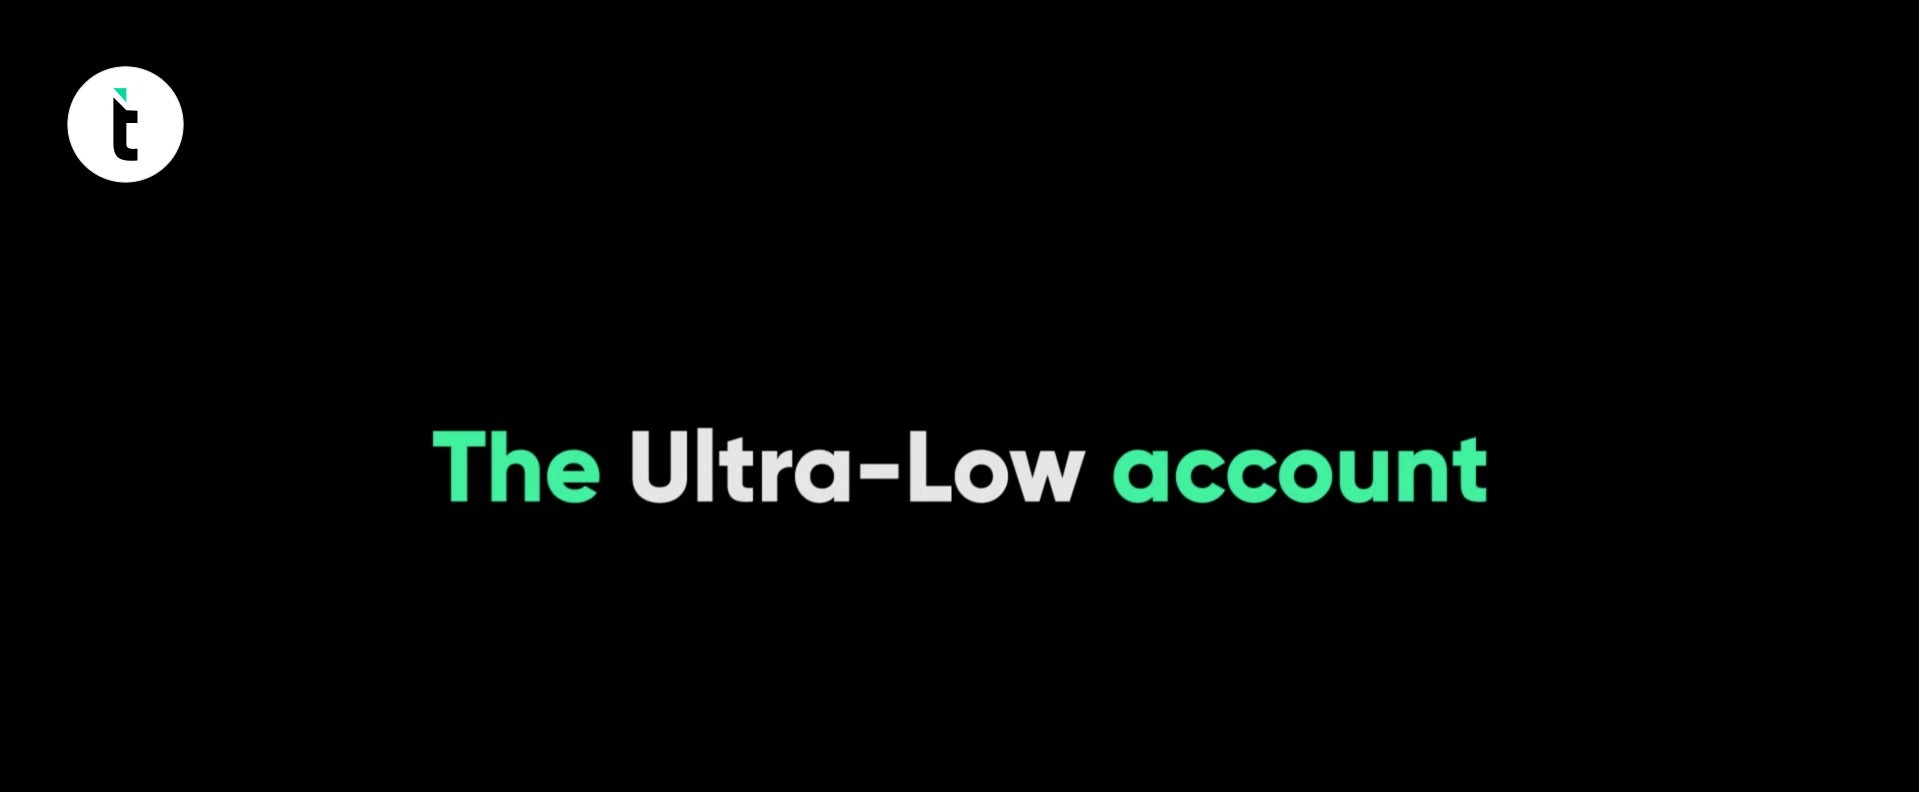 Trading.com ultra-low account